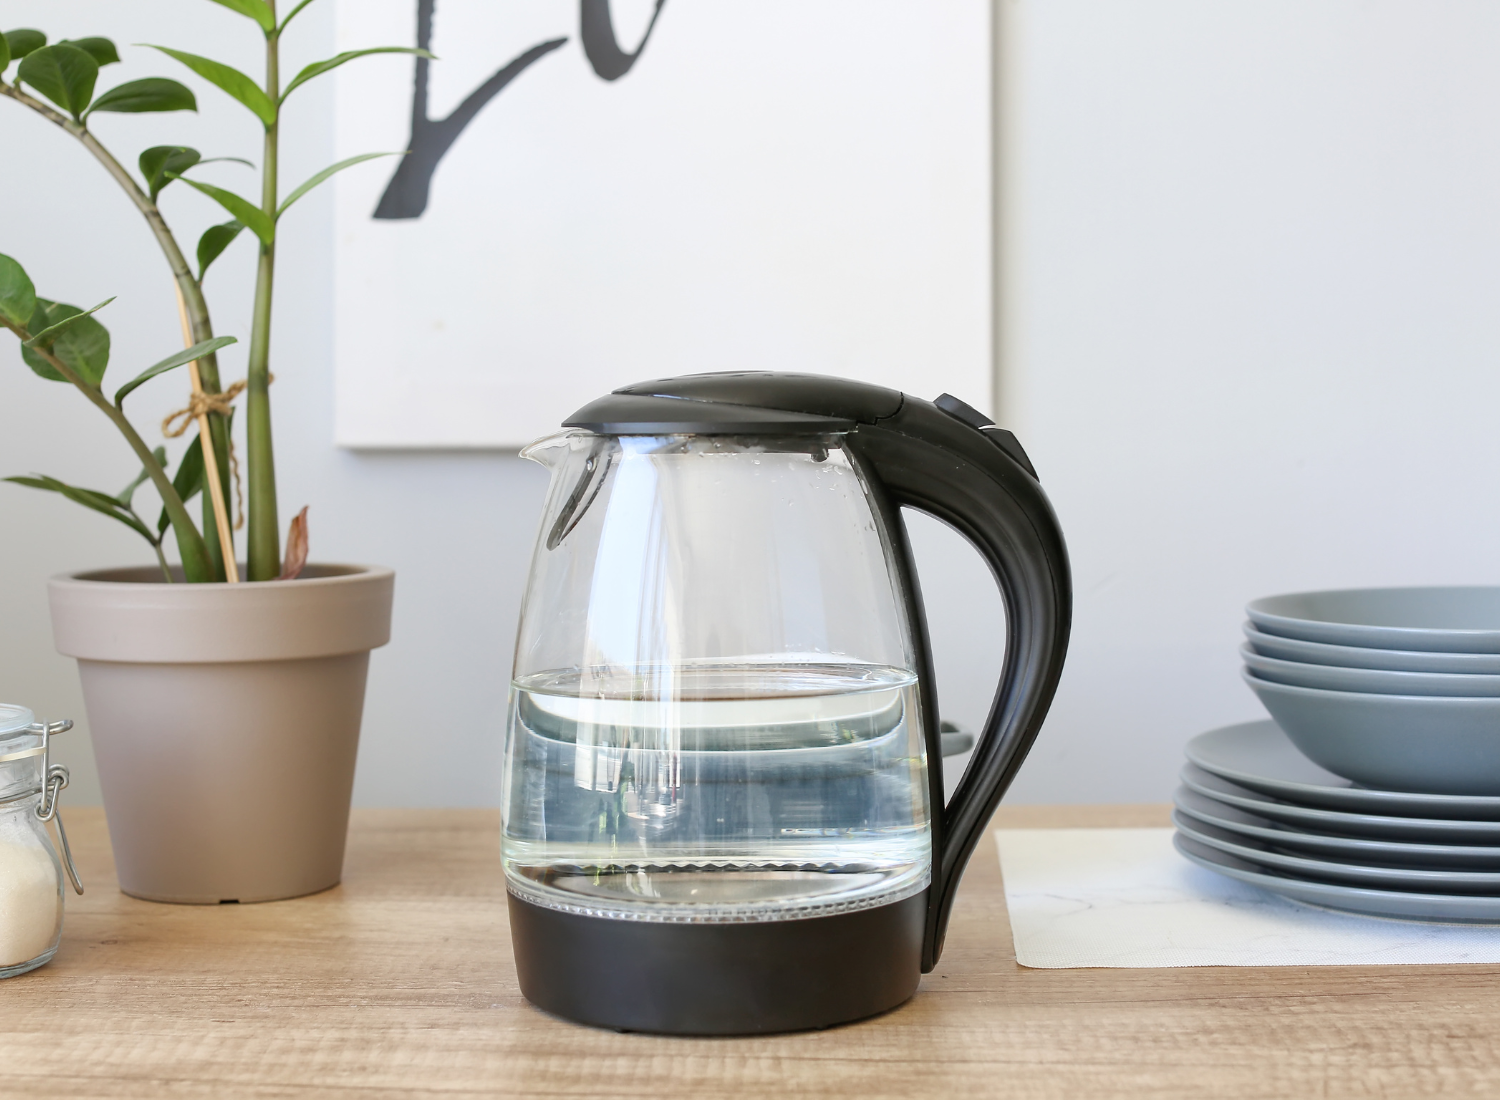 Stock image of an automatic kettle.